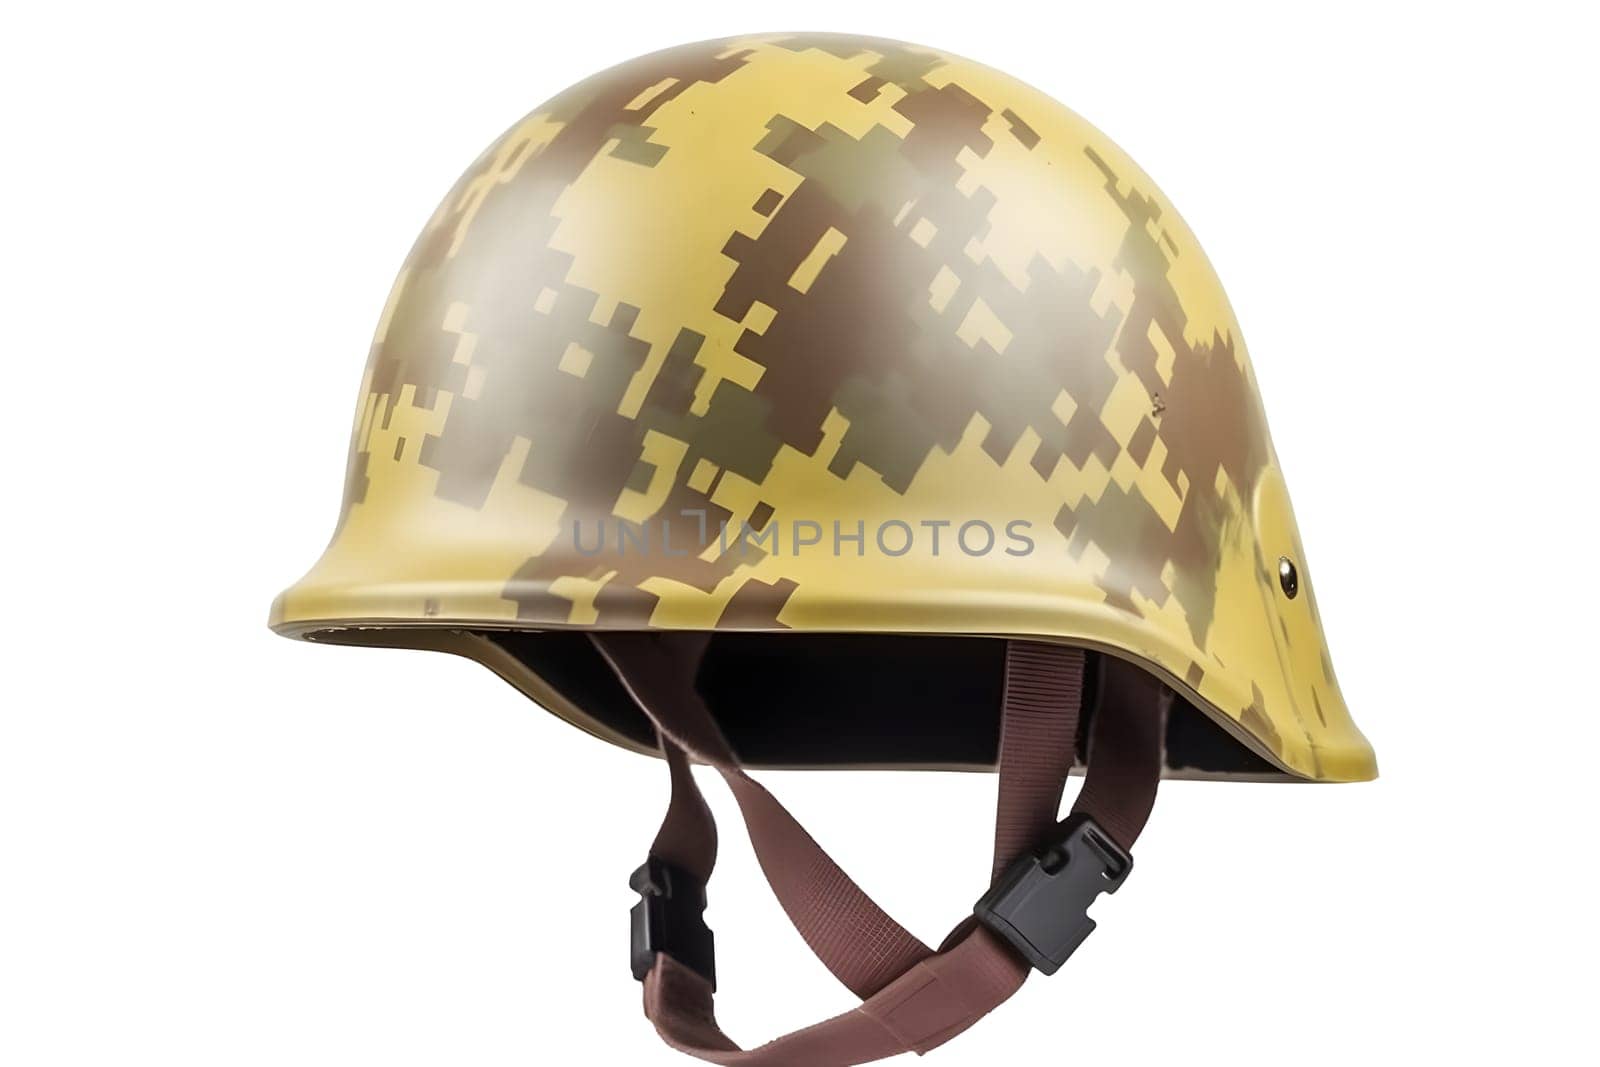 20-th century combat infantry helmet on white background, neural network generated image by z1b